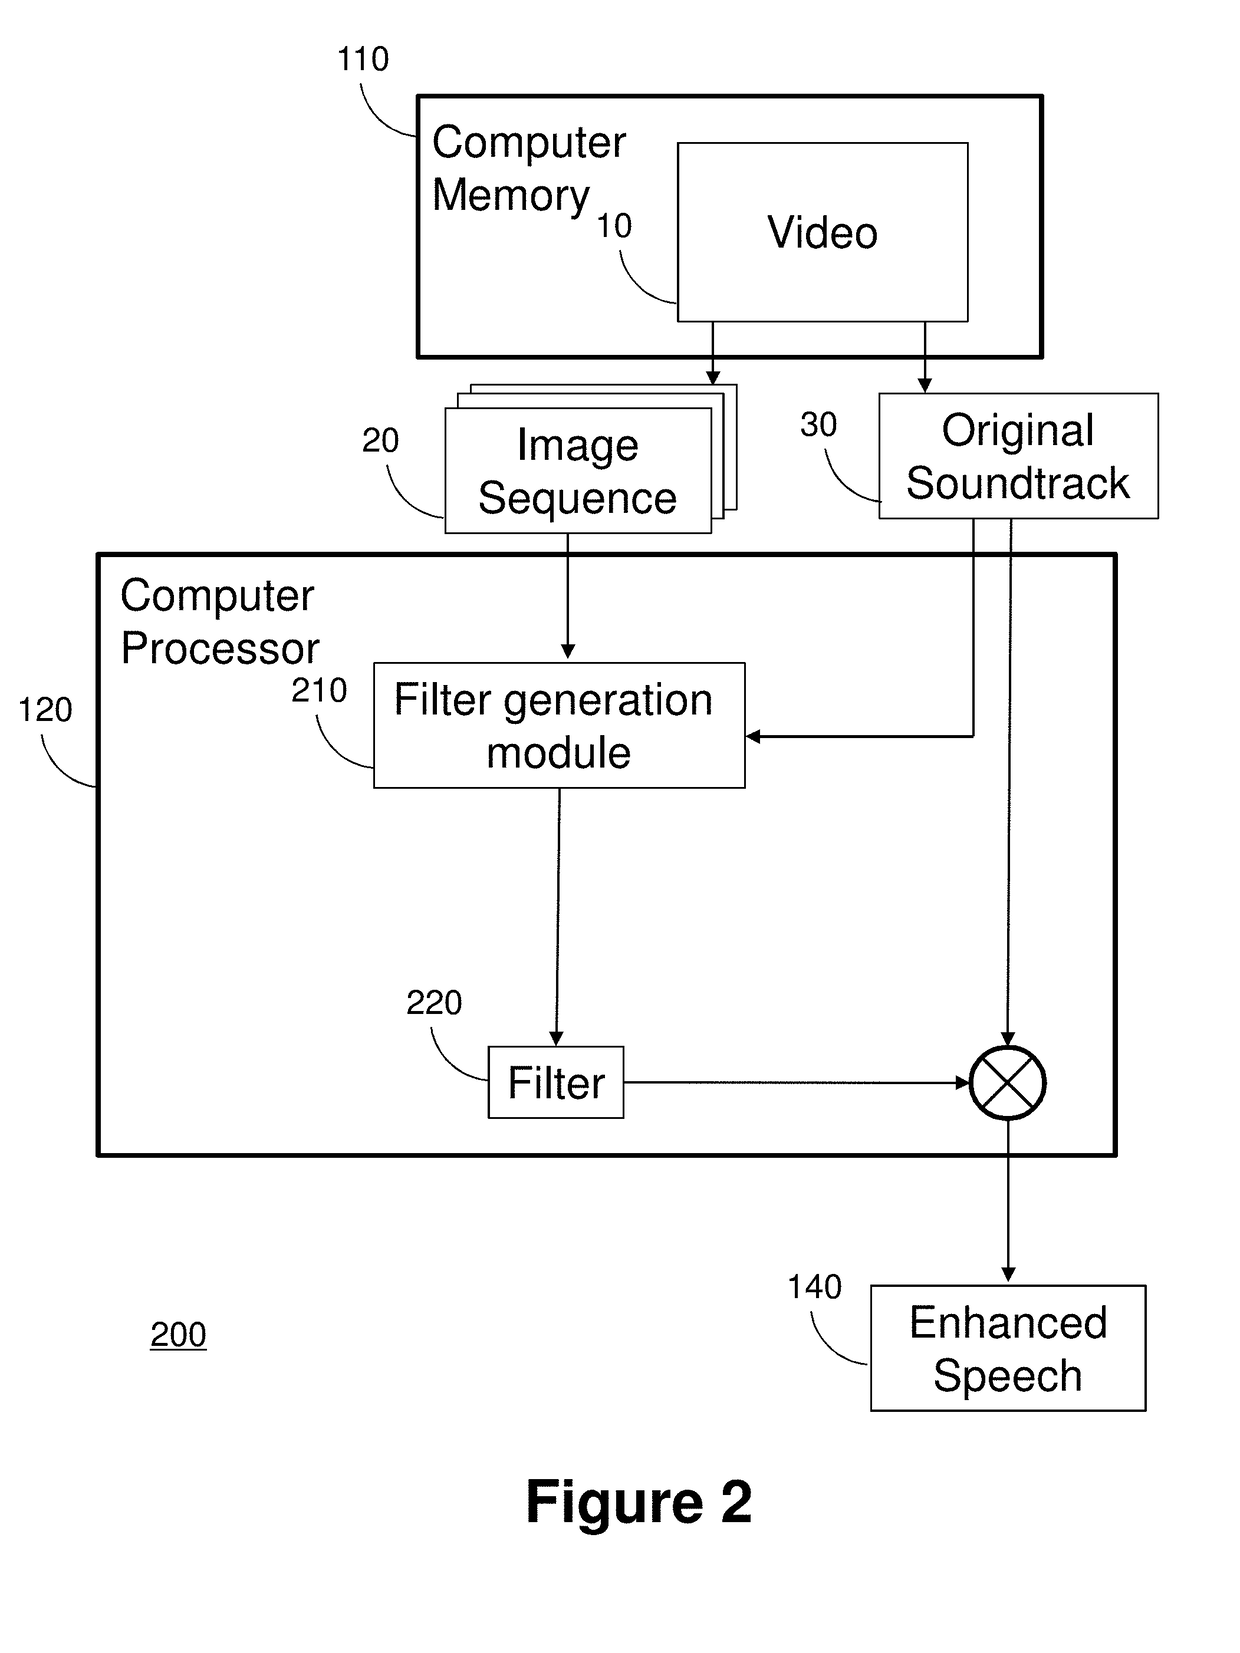 Method and system for enhancing a speech signal of a human speaker in a video using visual information